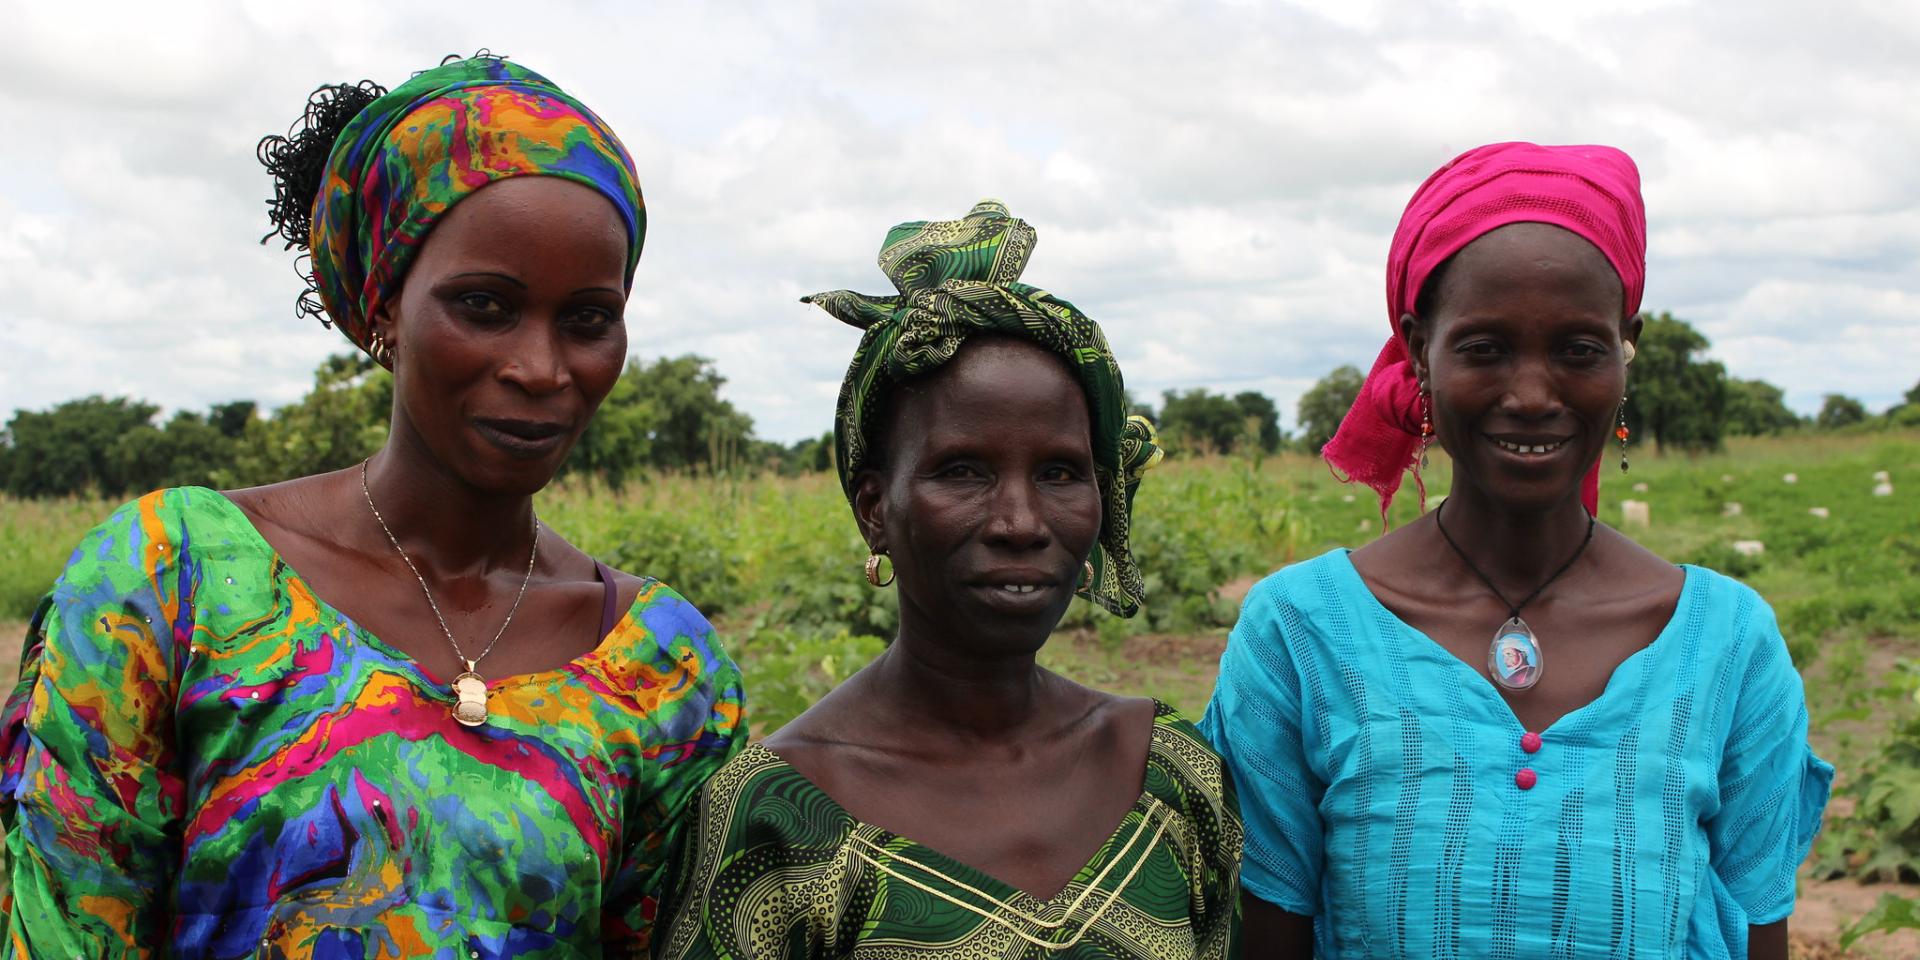 Ramatou Diouf (center) and her neighbours are part of of a women's farming group in Senegal that grow high-value crops for additional income. 